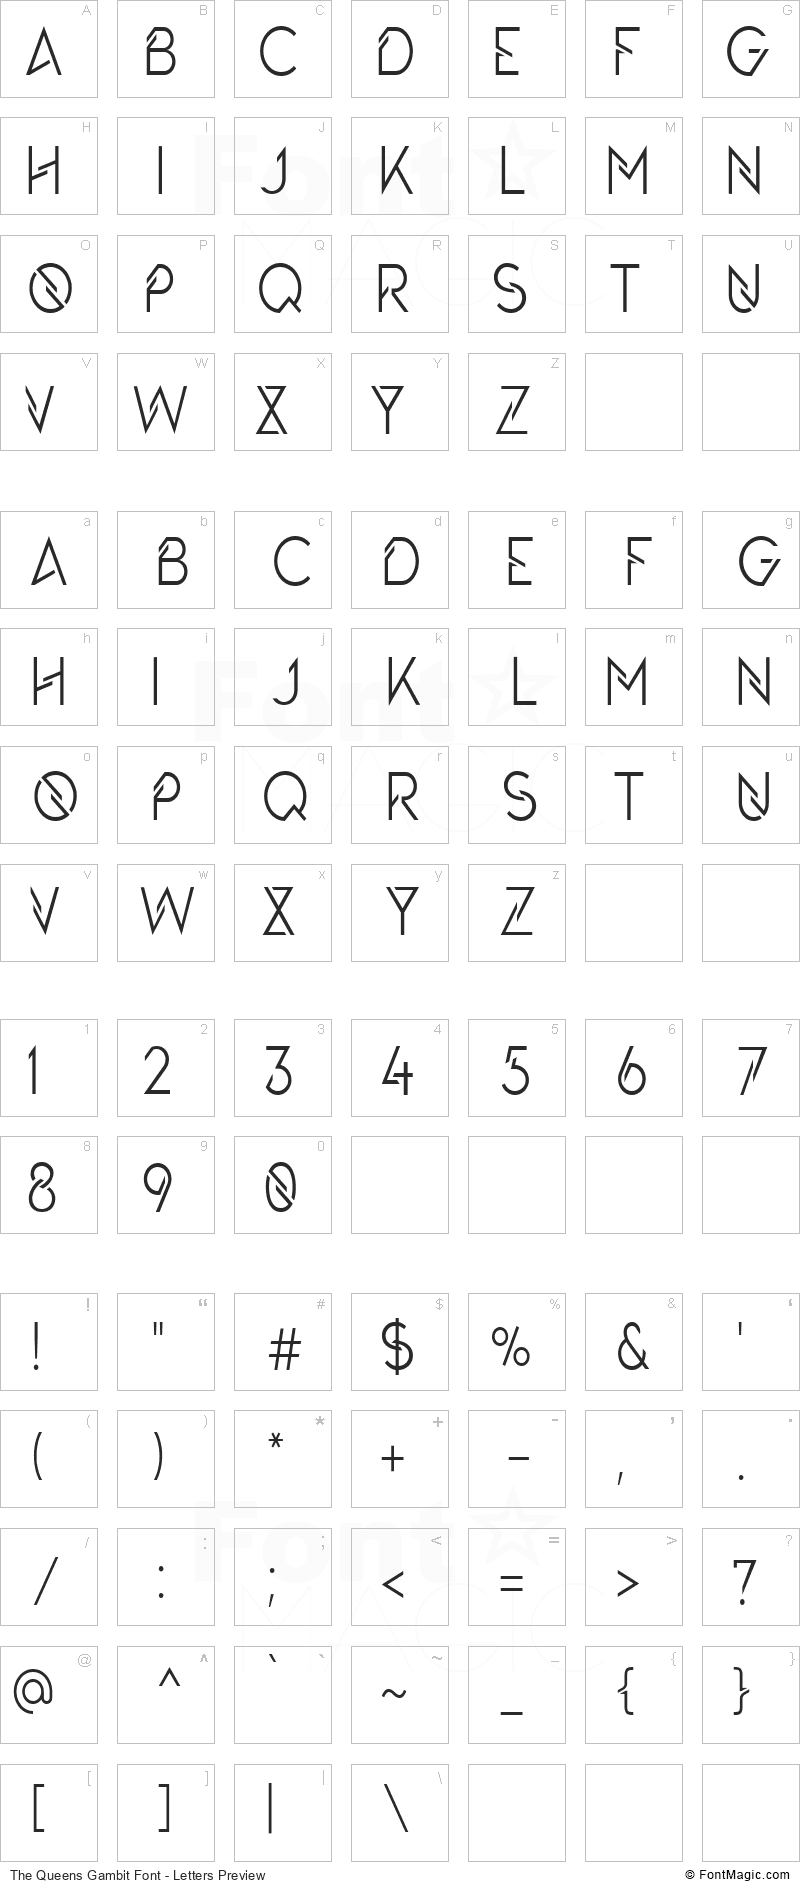 The Queens Gambit Font - All Latters Preview Chart